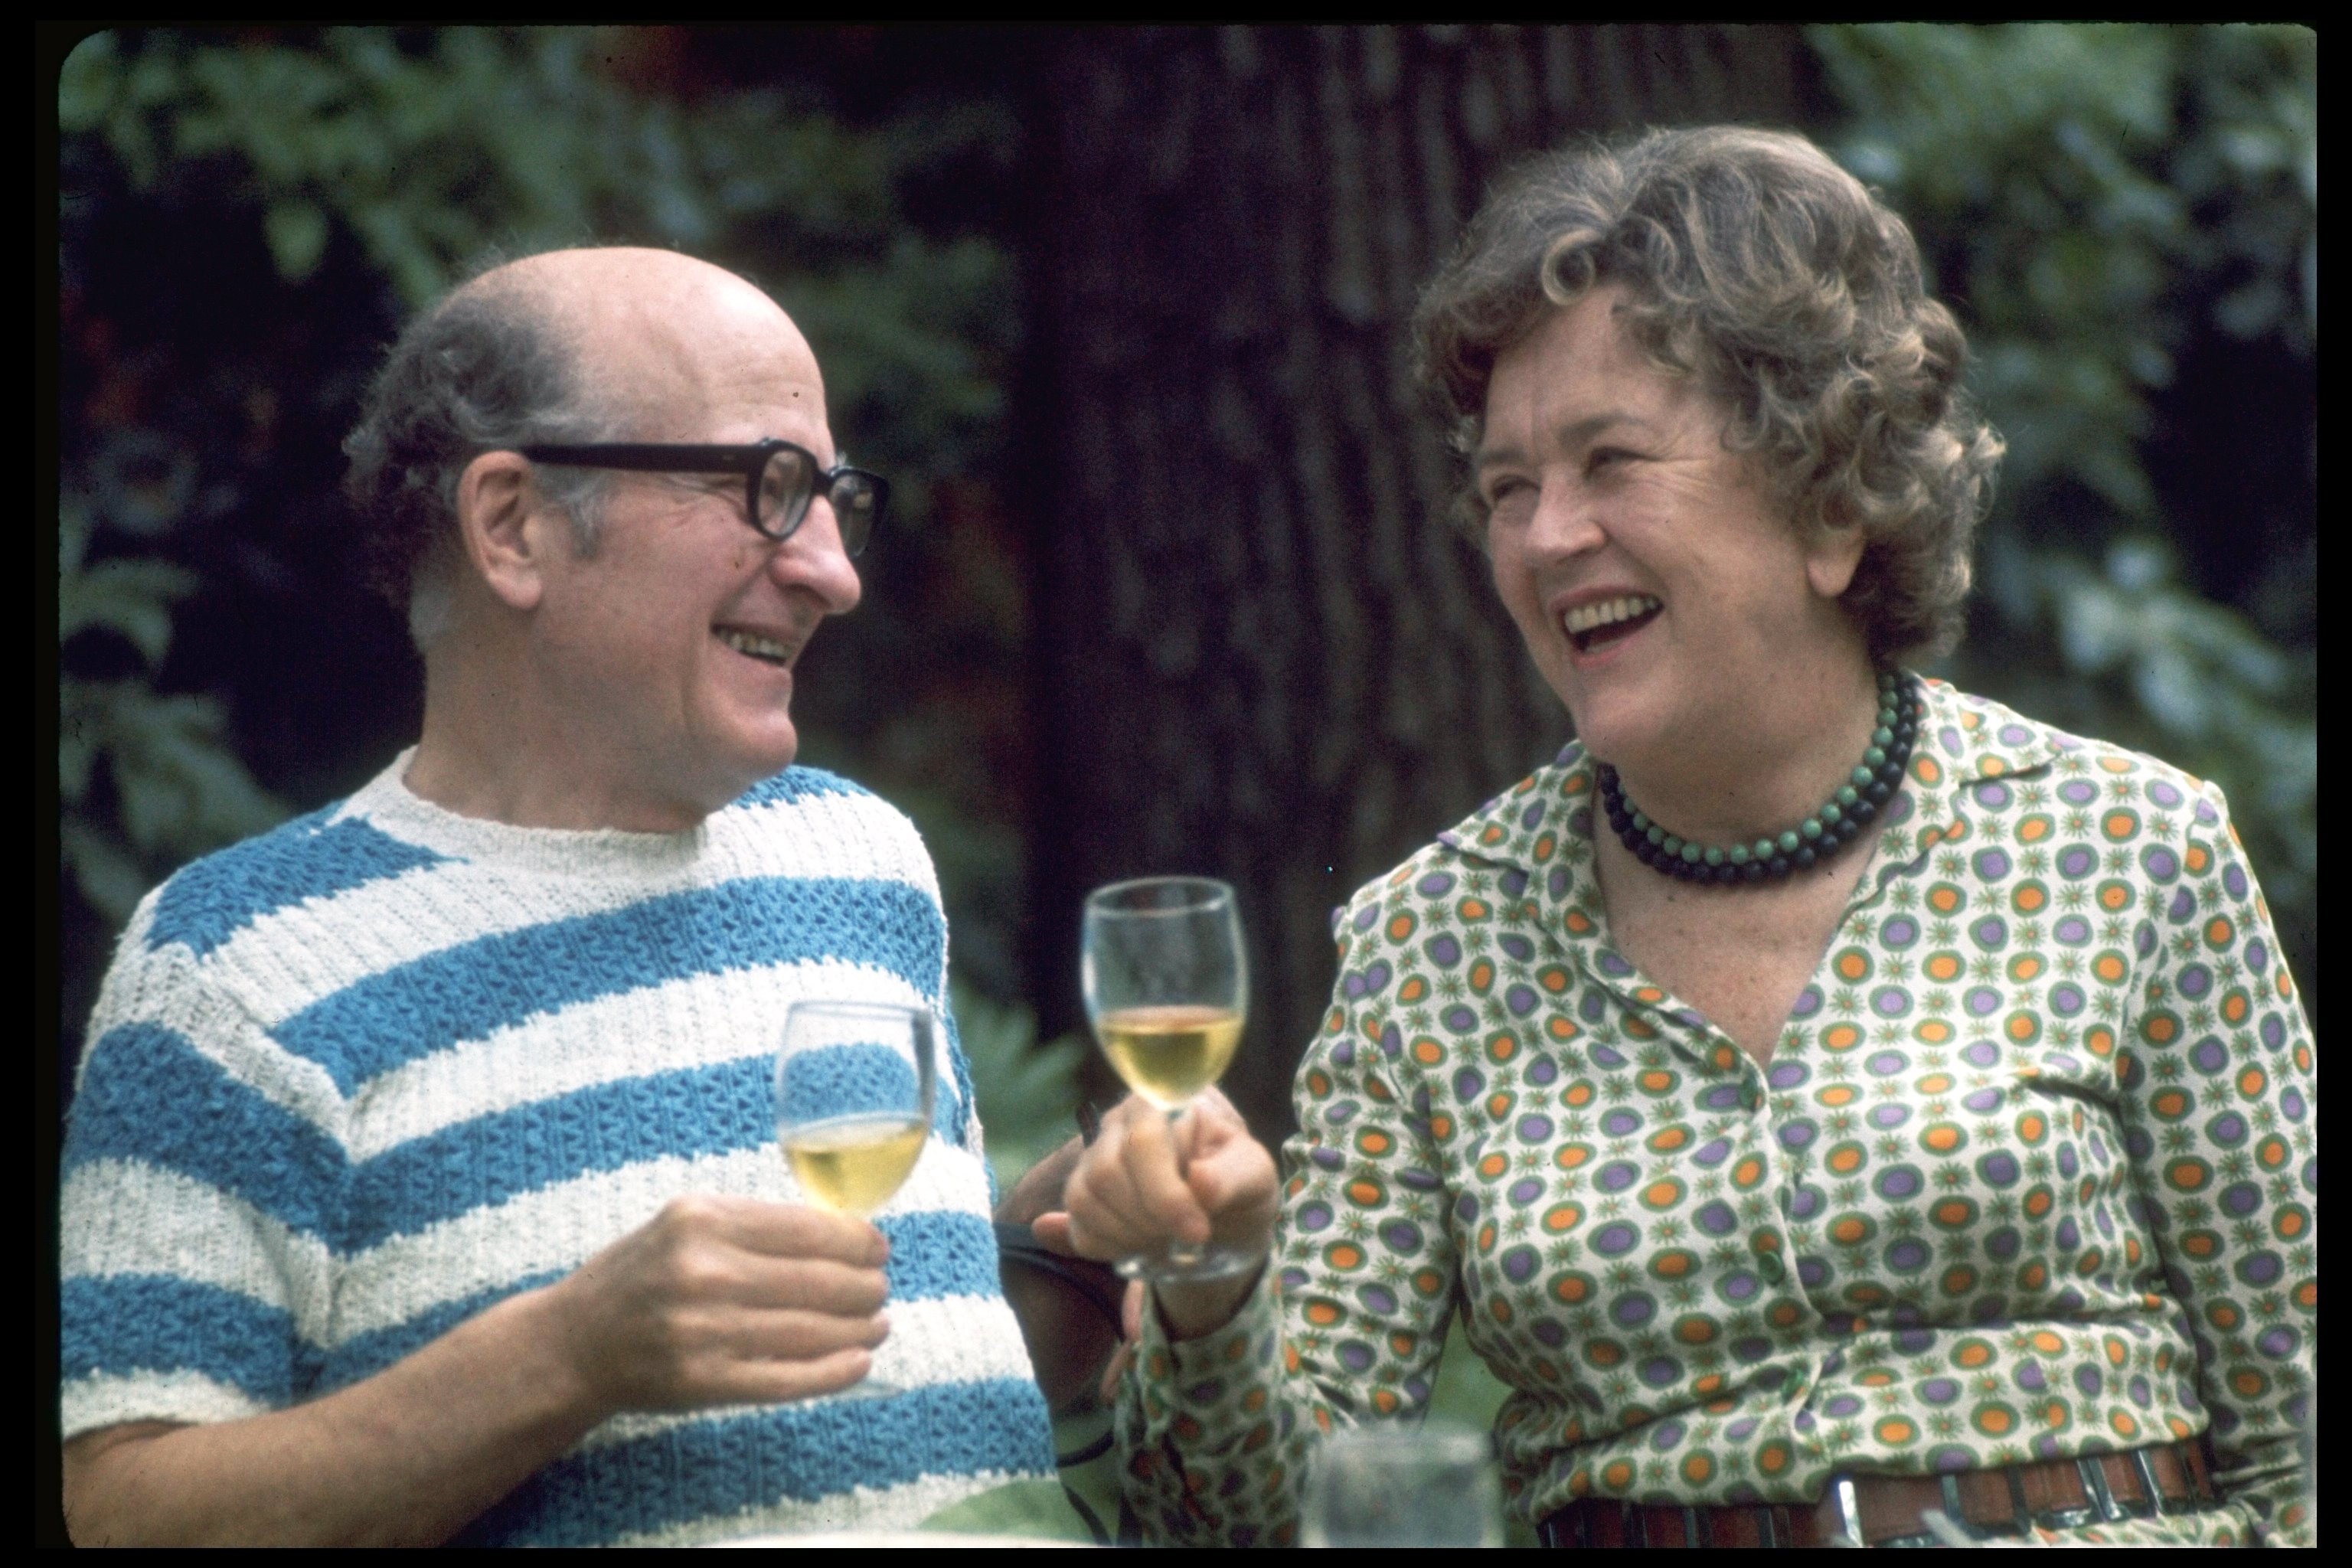 Julia Child and husband, Paul Child, enjoying a convivial glass of wine in outdoor setting. Photo: Getty Images